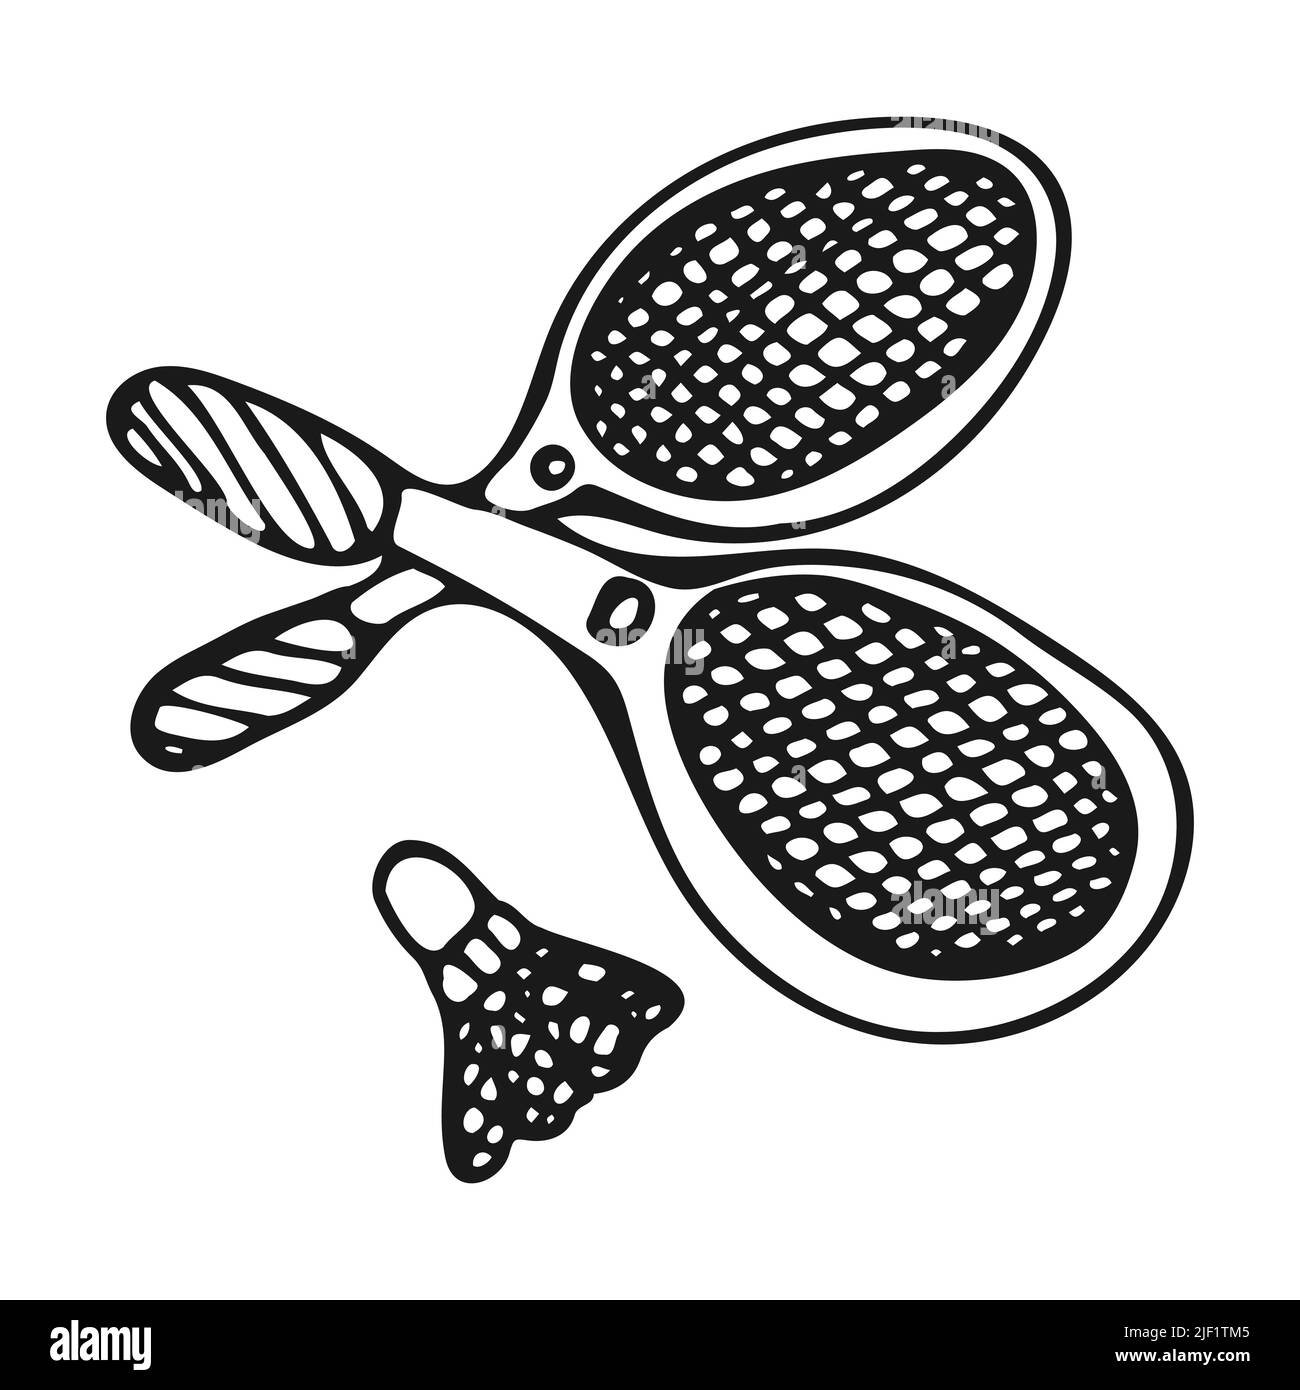 Two rackets and a shuttlecock for playing badminton in the style of doodles. Tennis rackets are hand drawn on a white background. Black and white Stock Vector